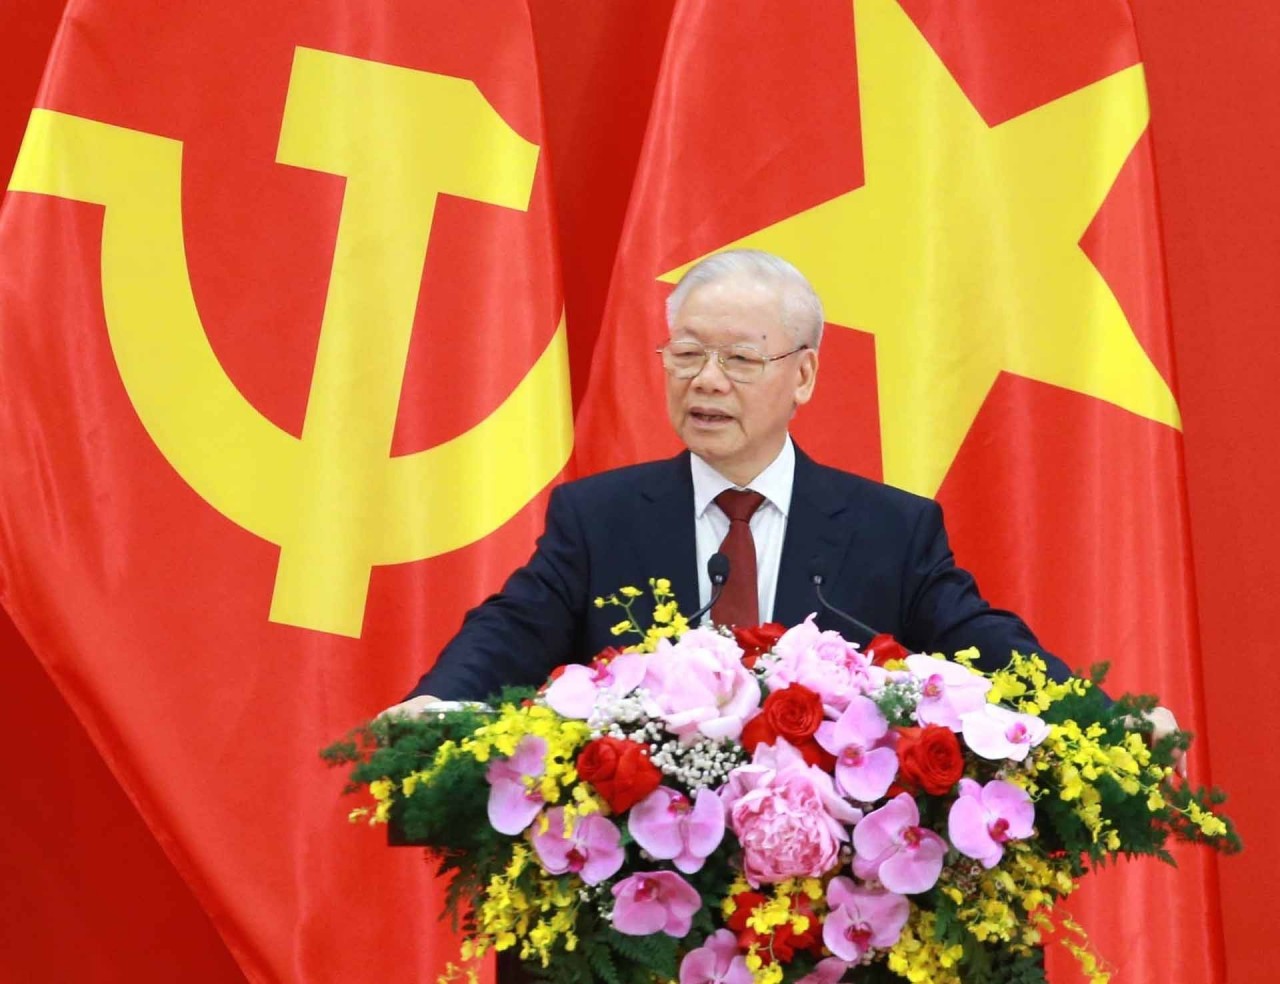 Party General Secretary’s article charts vision to build strong Vietnam (Part I)